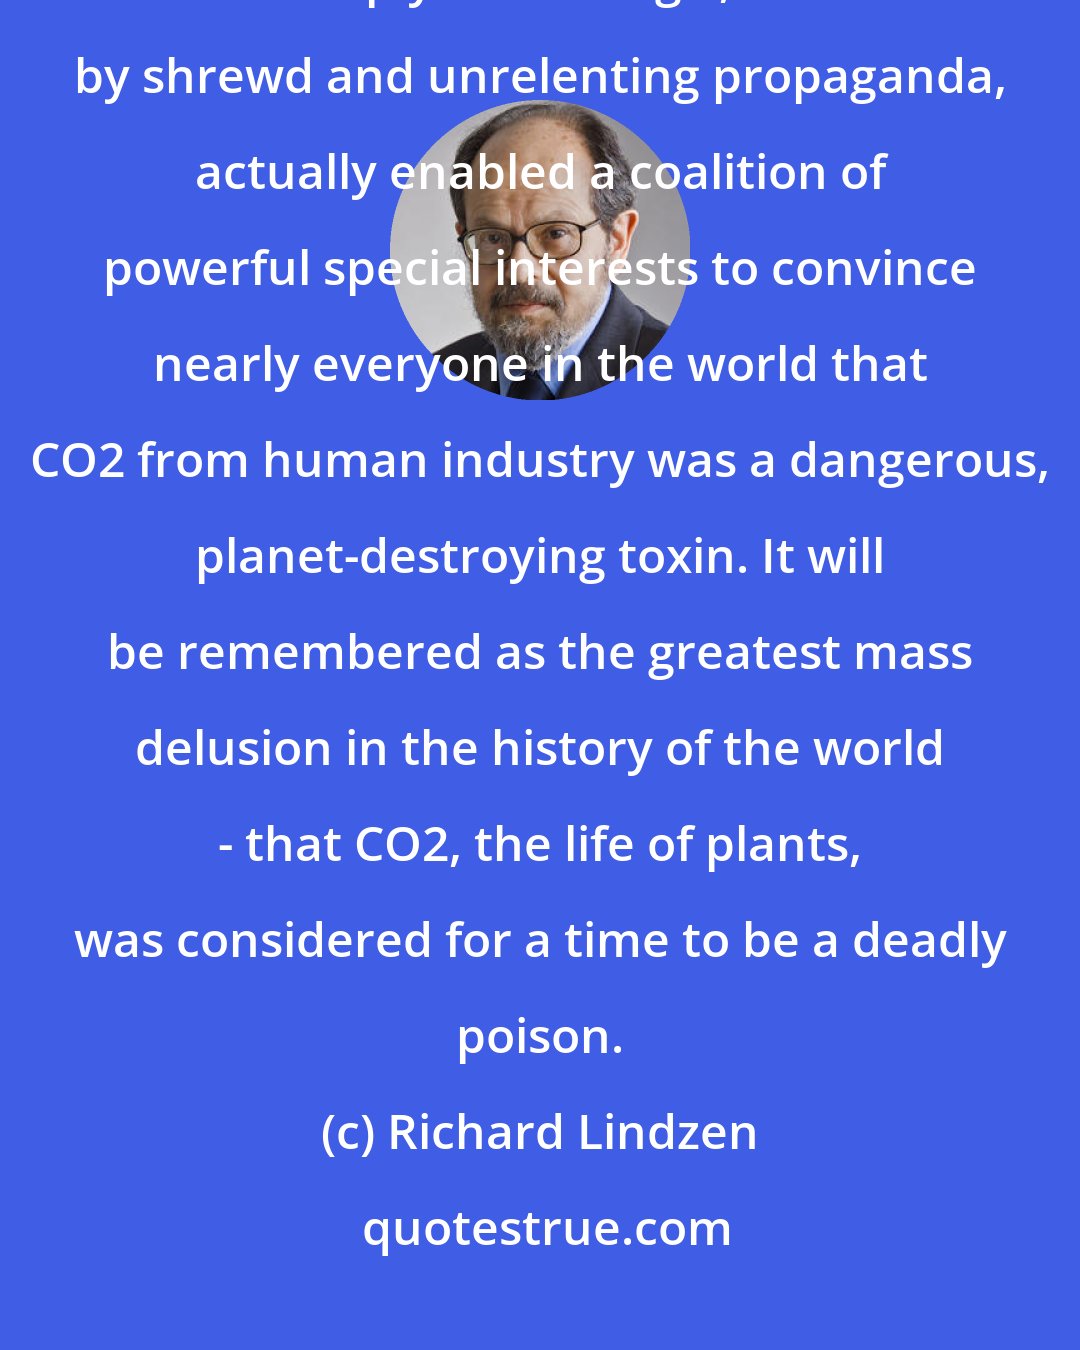 Richard Lindzen: What historians will definitely wonder about in future centuries is how deeply flawed logic, obscured by shrewd and unrelenting propaganda, actually enabled a coalition of powerful special interests to convince nearly everyone in the world that CO2 from human industry was a dangerous, planet-destroying toxin. It will be remembered as the greatest mass delusion in the history of the world - that CO2, the life of plants, was considered for a time to be a deadly poison.